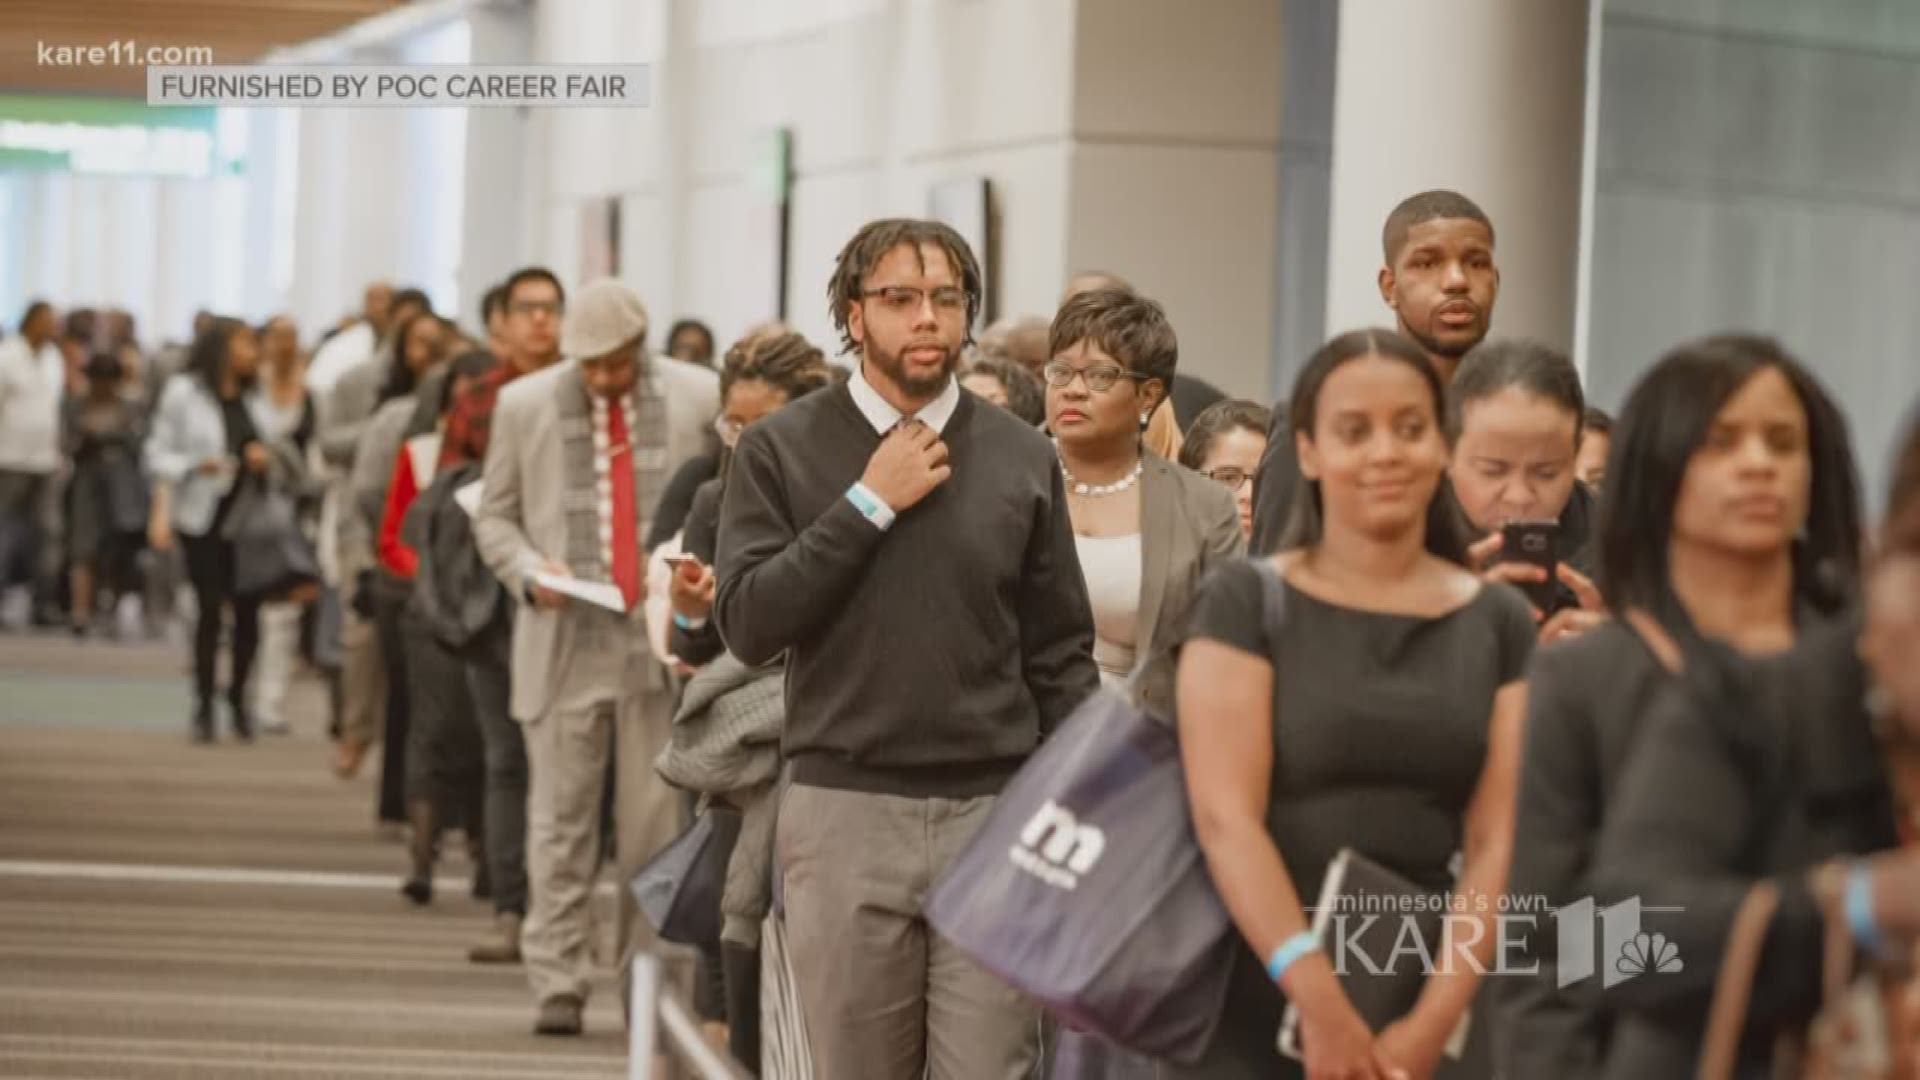 A career fair targeting job candidates of color is set for Friday, April 20 at the Mpls. Convention Center.